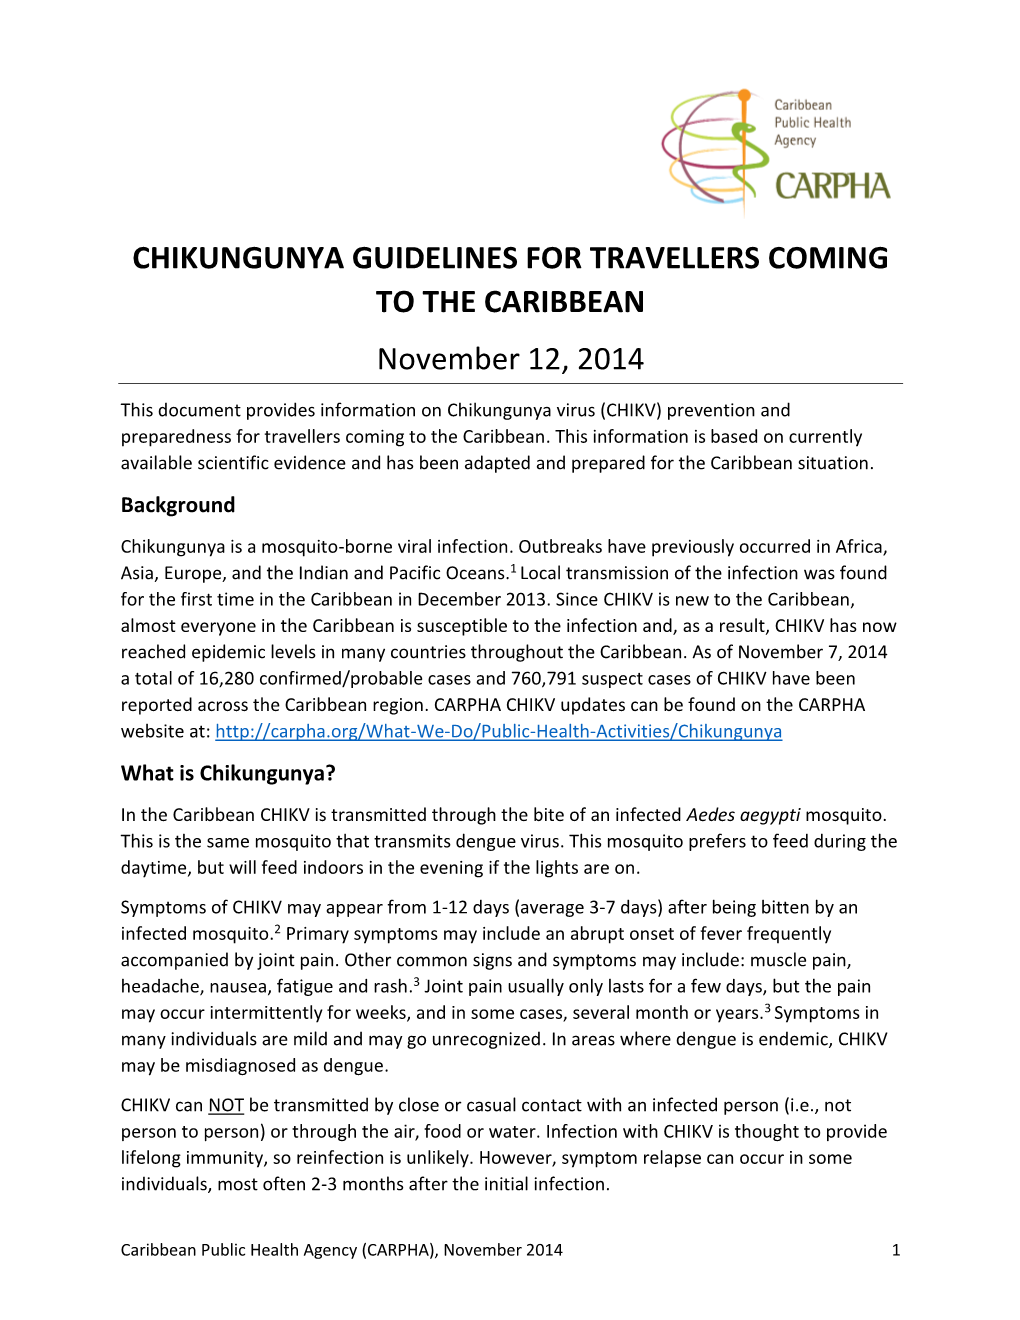 CHIKUNGUNYA GUIDELINES for TRAVELLERS COMING to the CARIBBEAN November 12, 2014